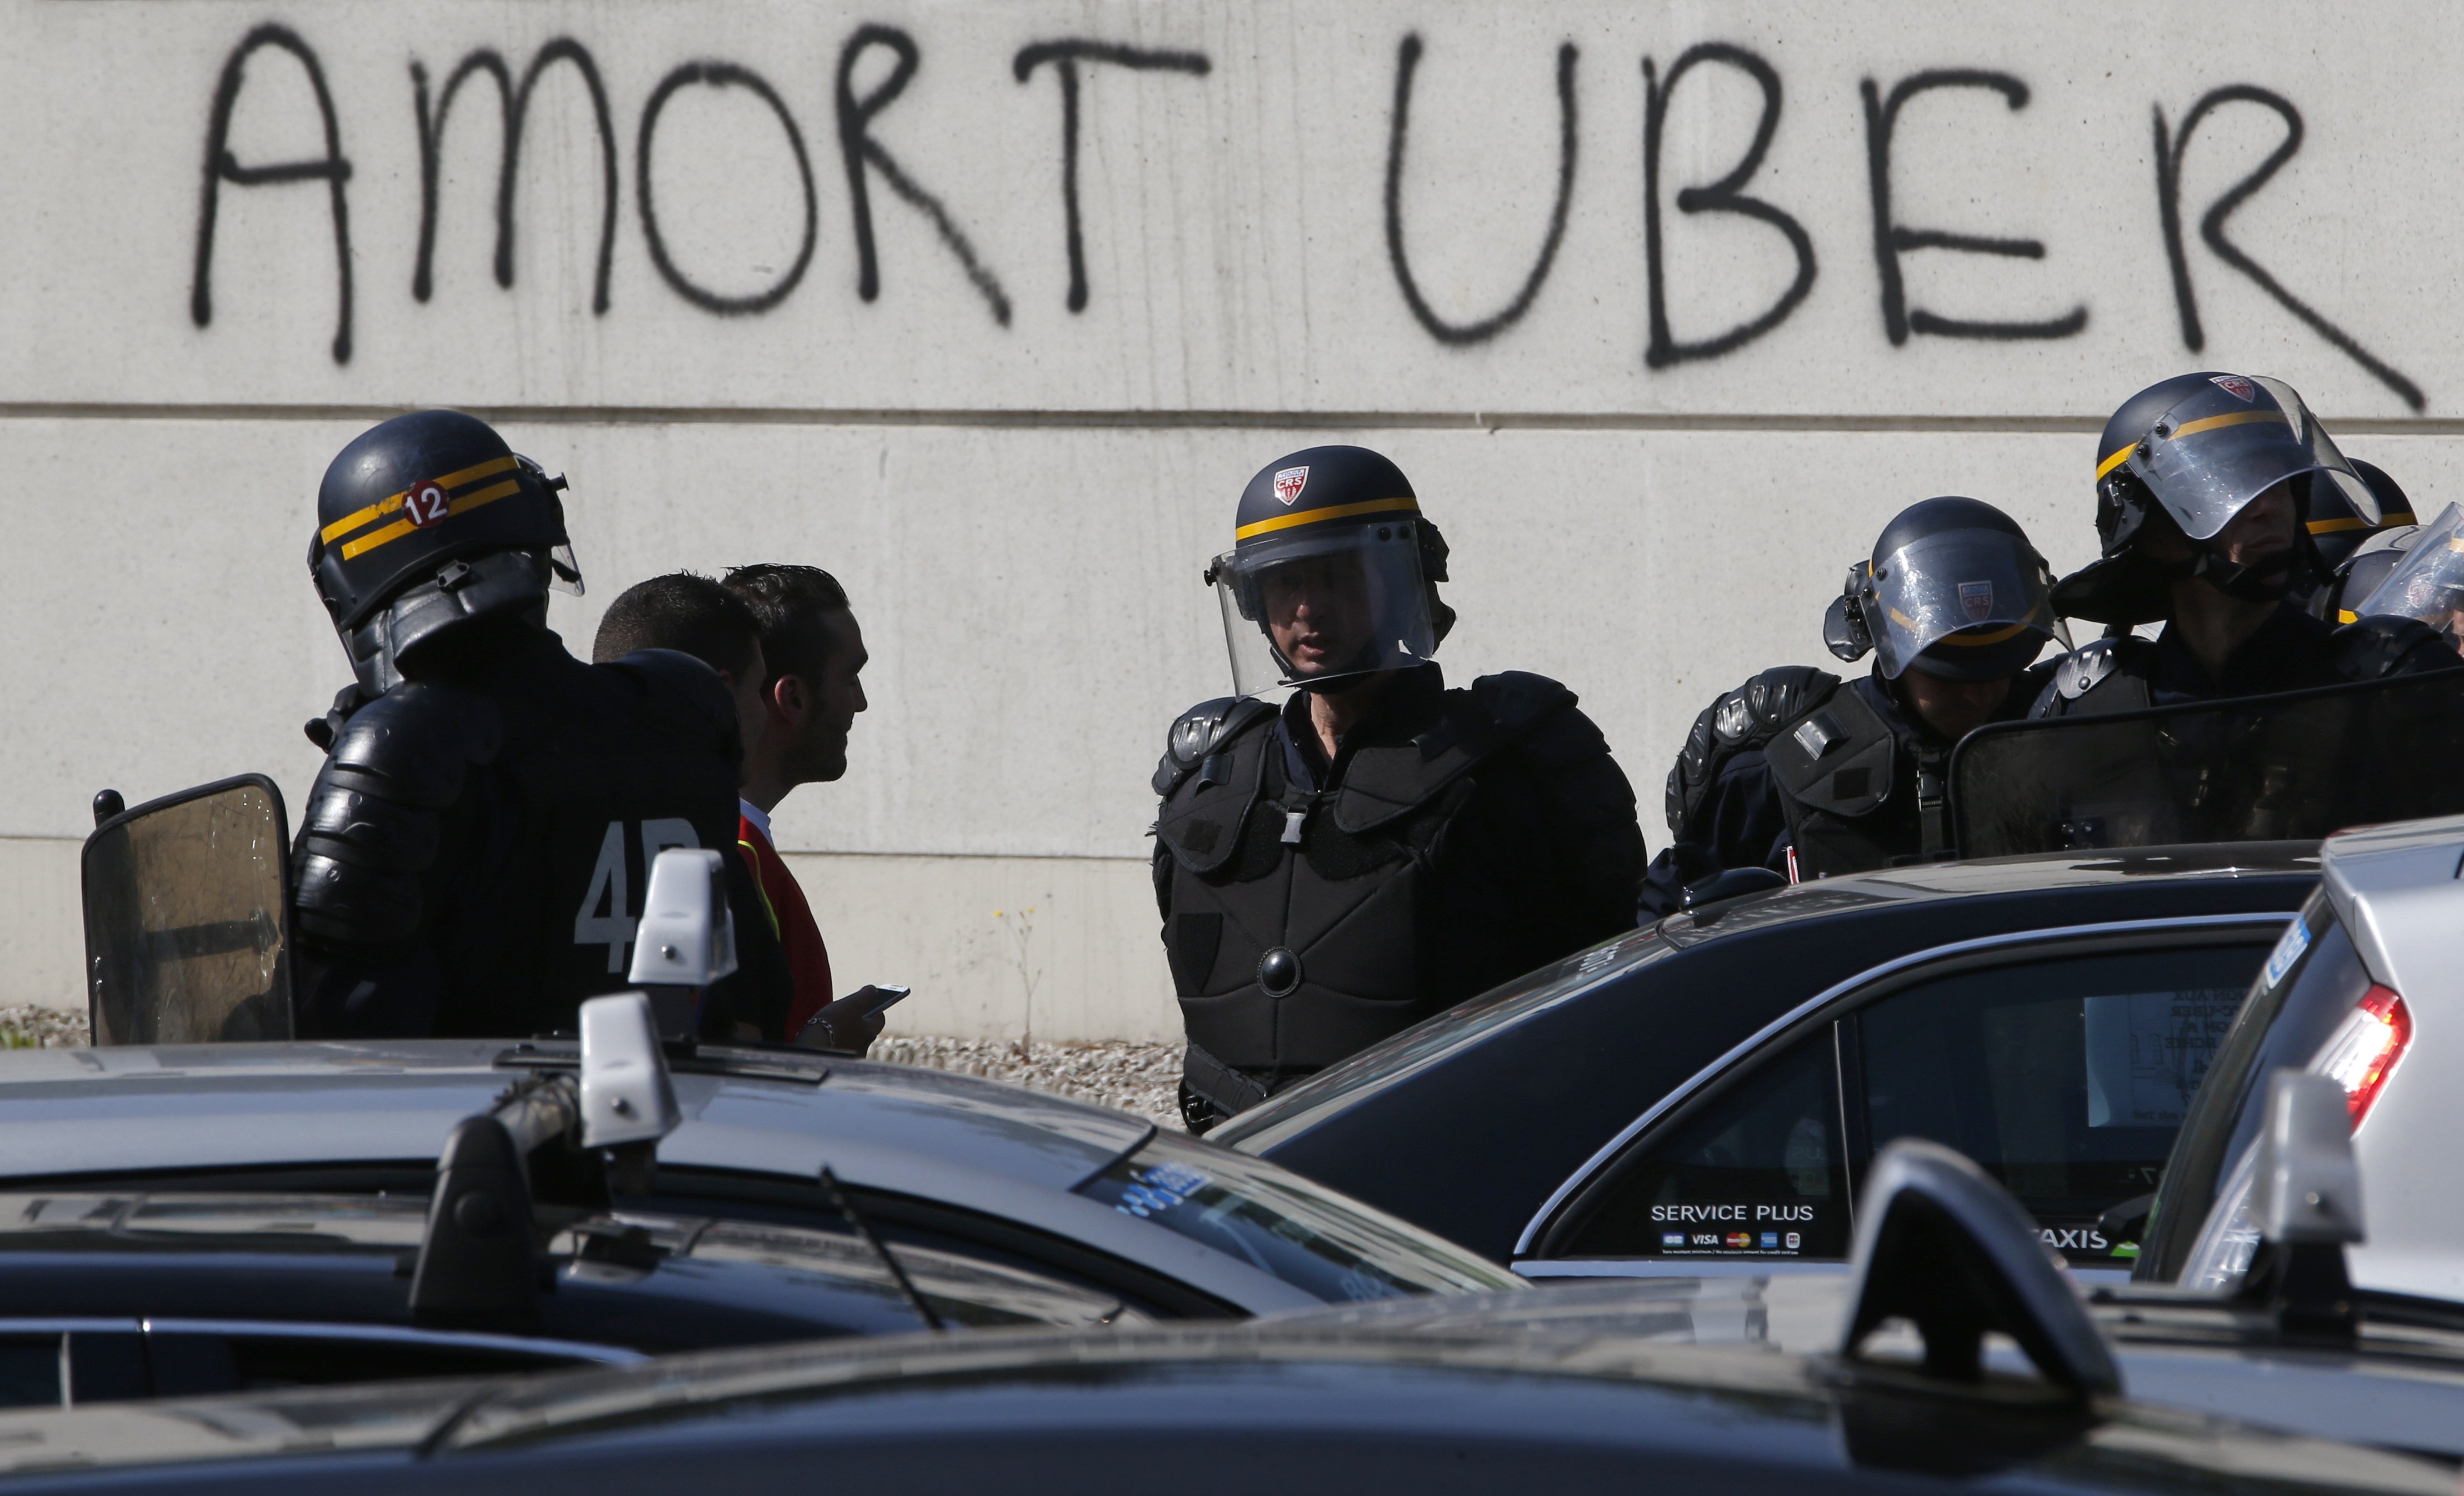 French taxi drivers on strike protest Uber on June 25, 2015. Via businessinsider.com.